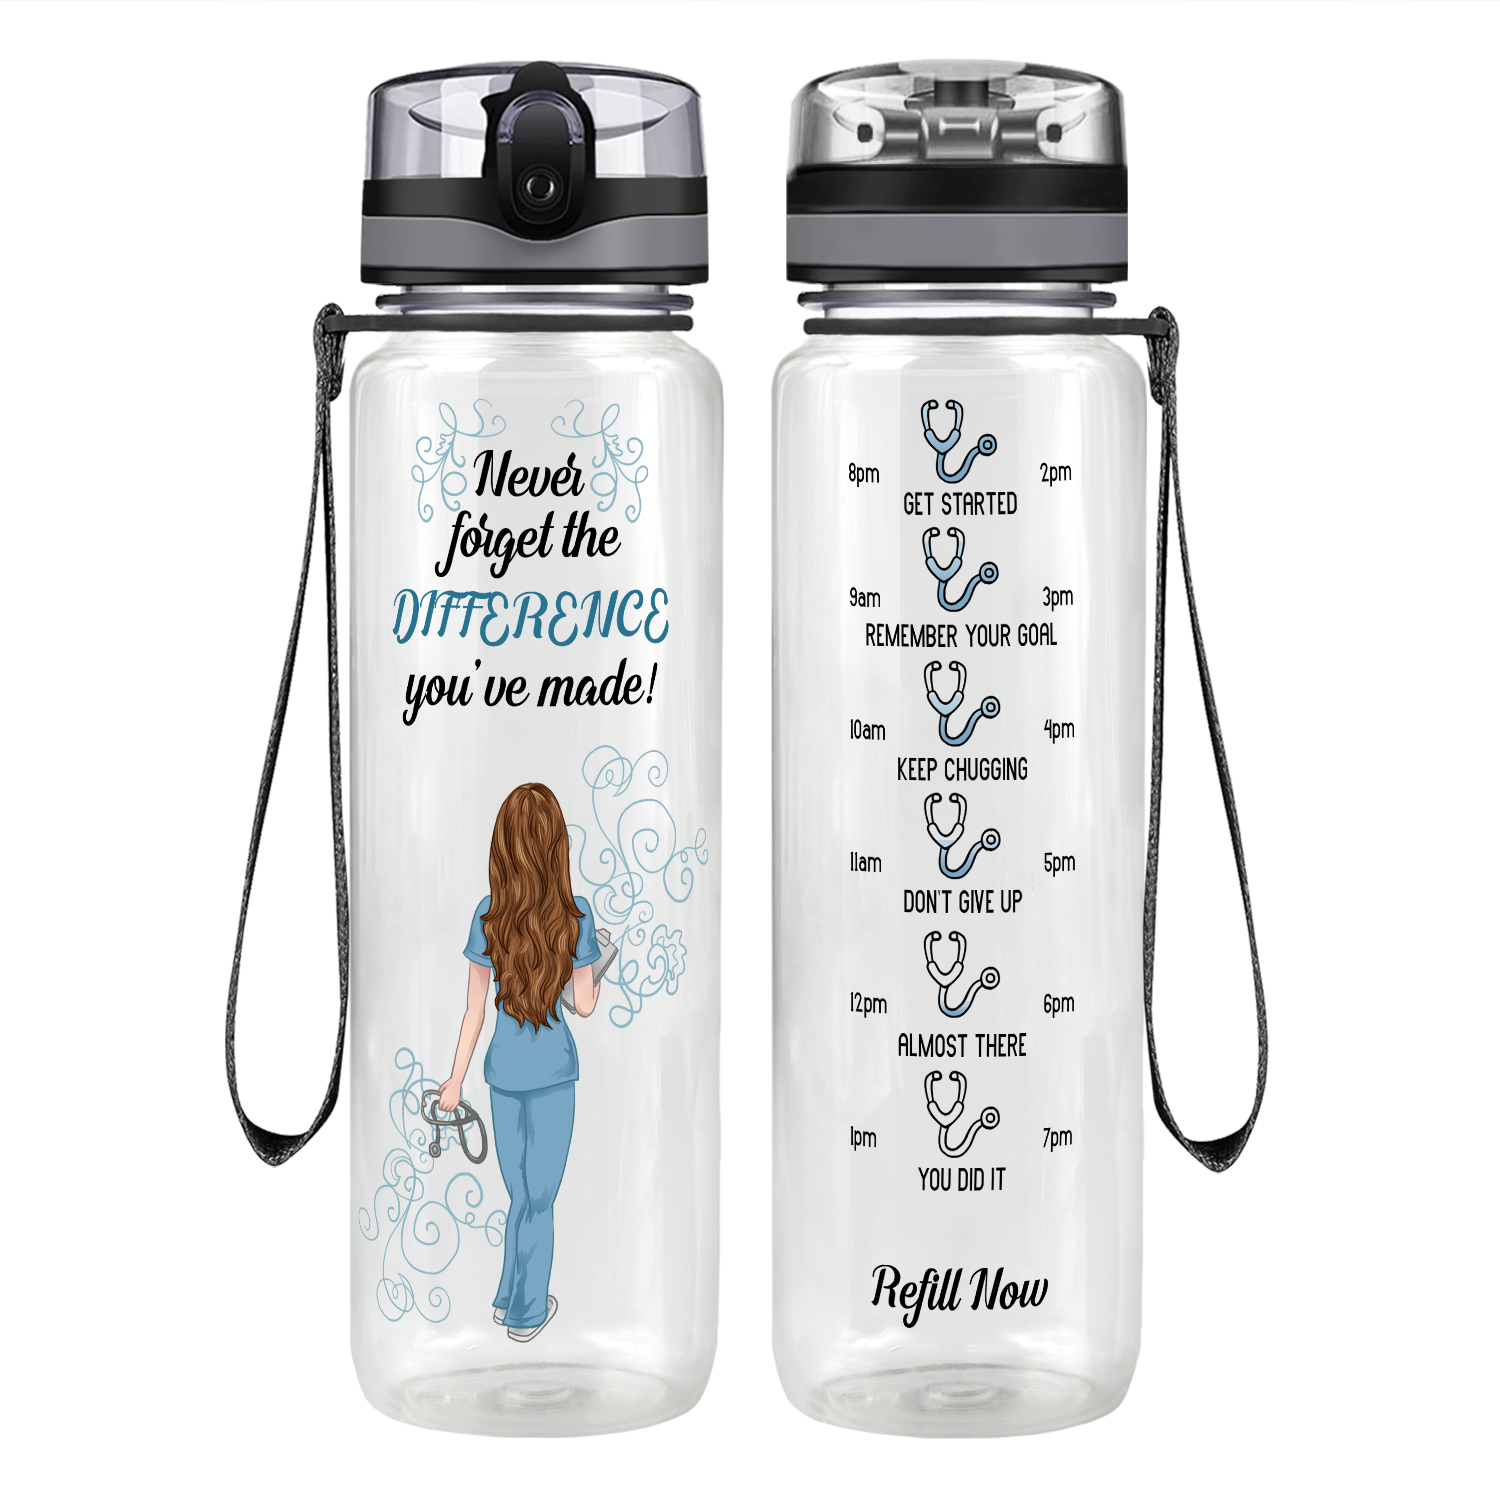 Never Forget the Difference You've Made Motivational Tracking Water Bottle